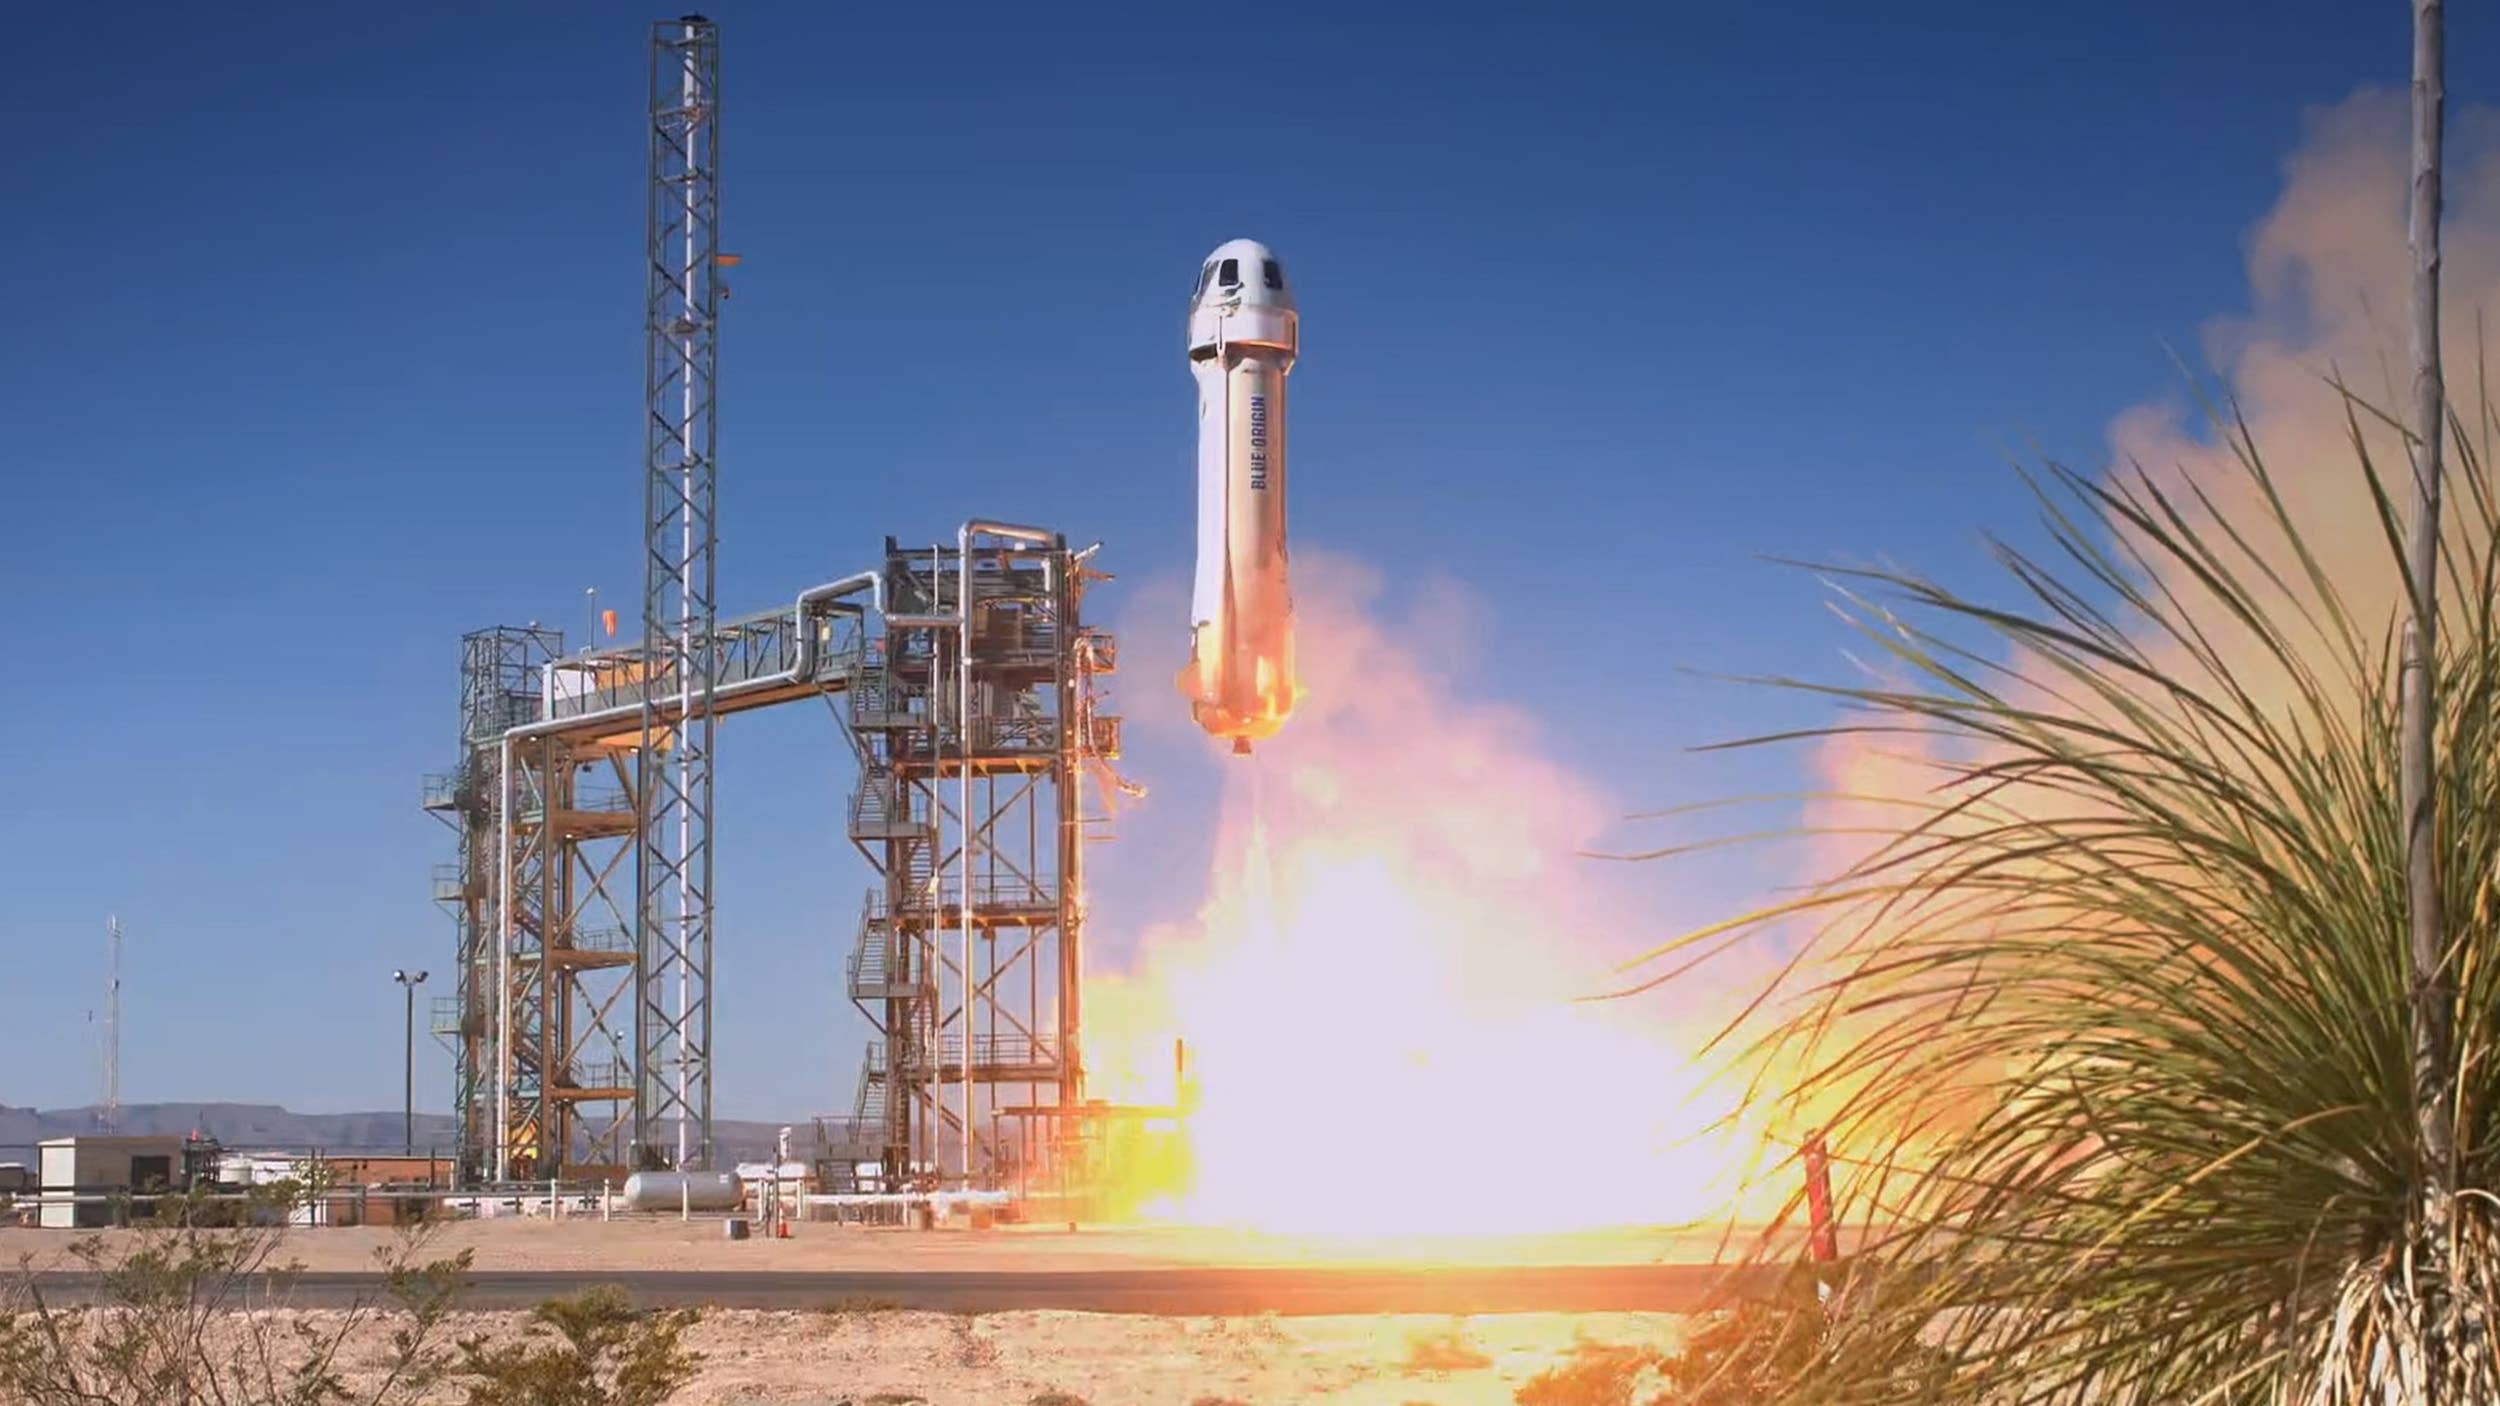 Blue Origin's New Shepard rocket lifts off during the NS-25 astronaut mission on May 19. Credit: Blue Origin.